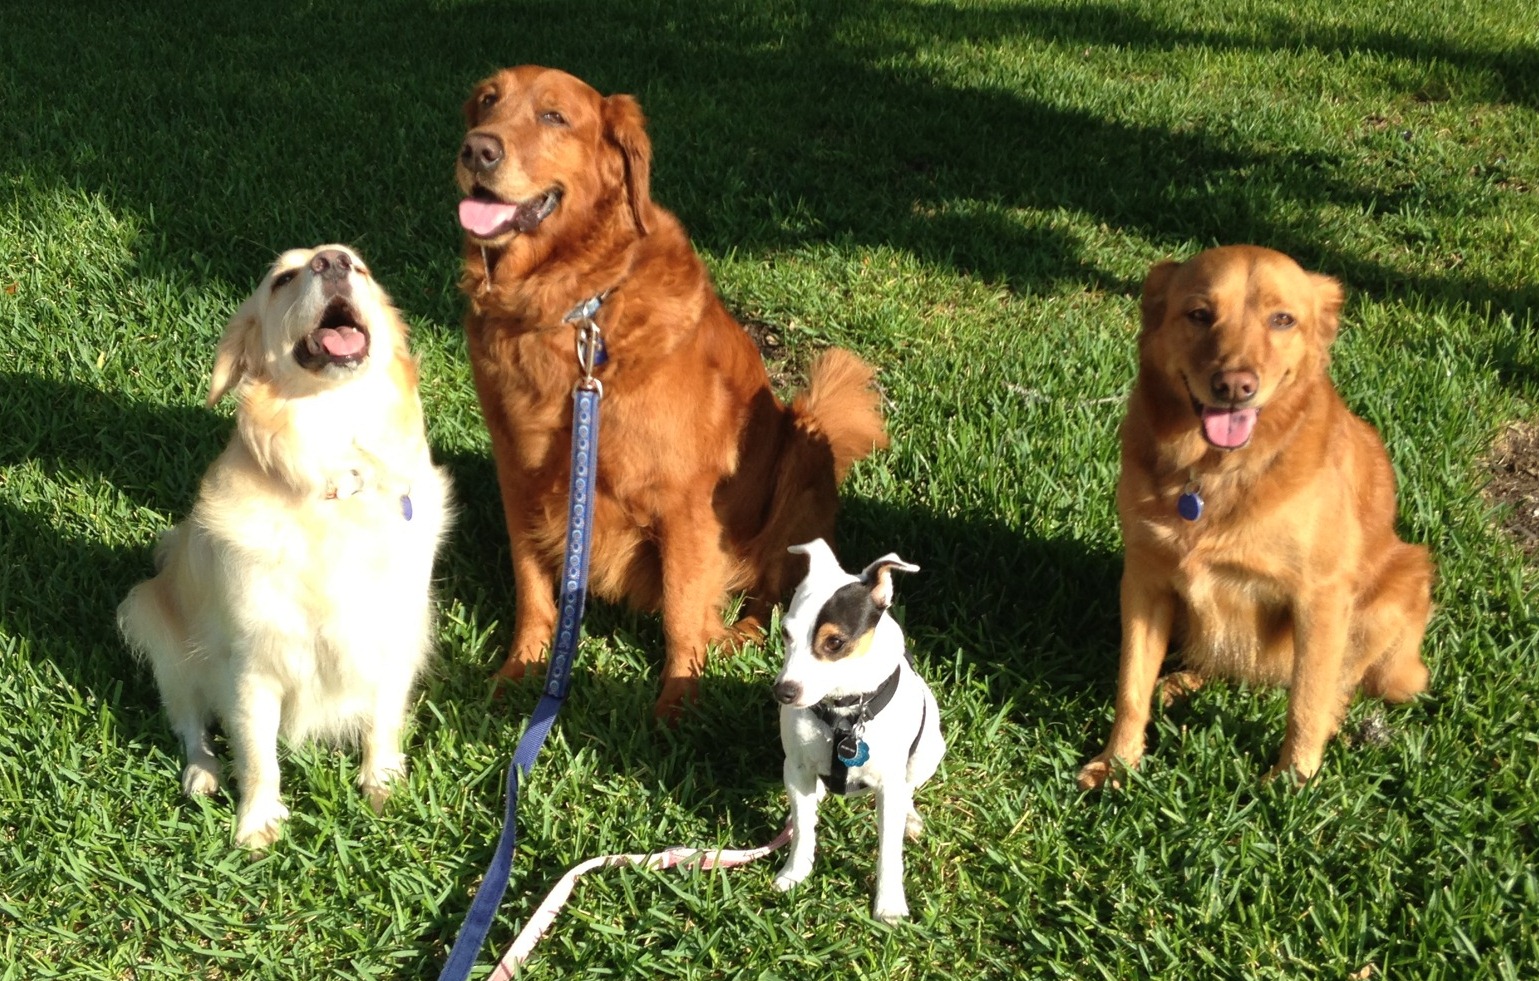 Kacy with 3 of Scott and Sheila's dogs